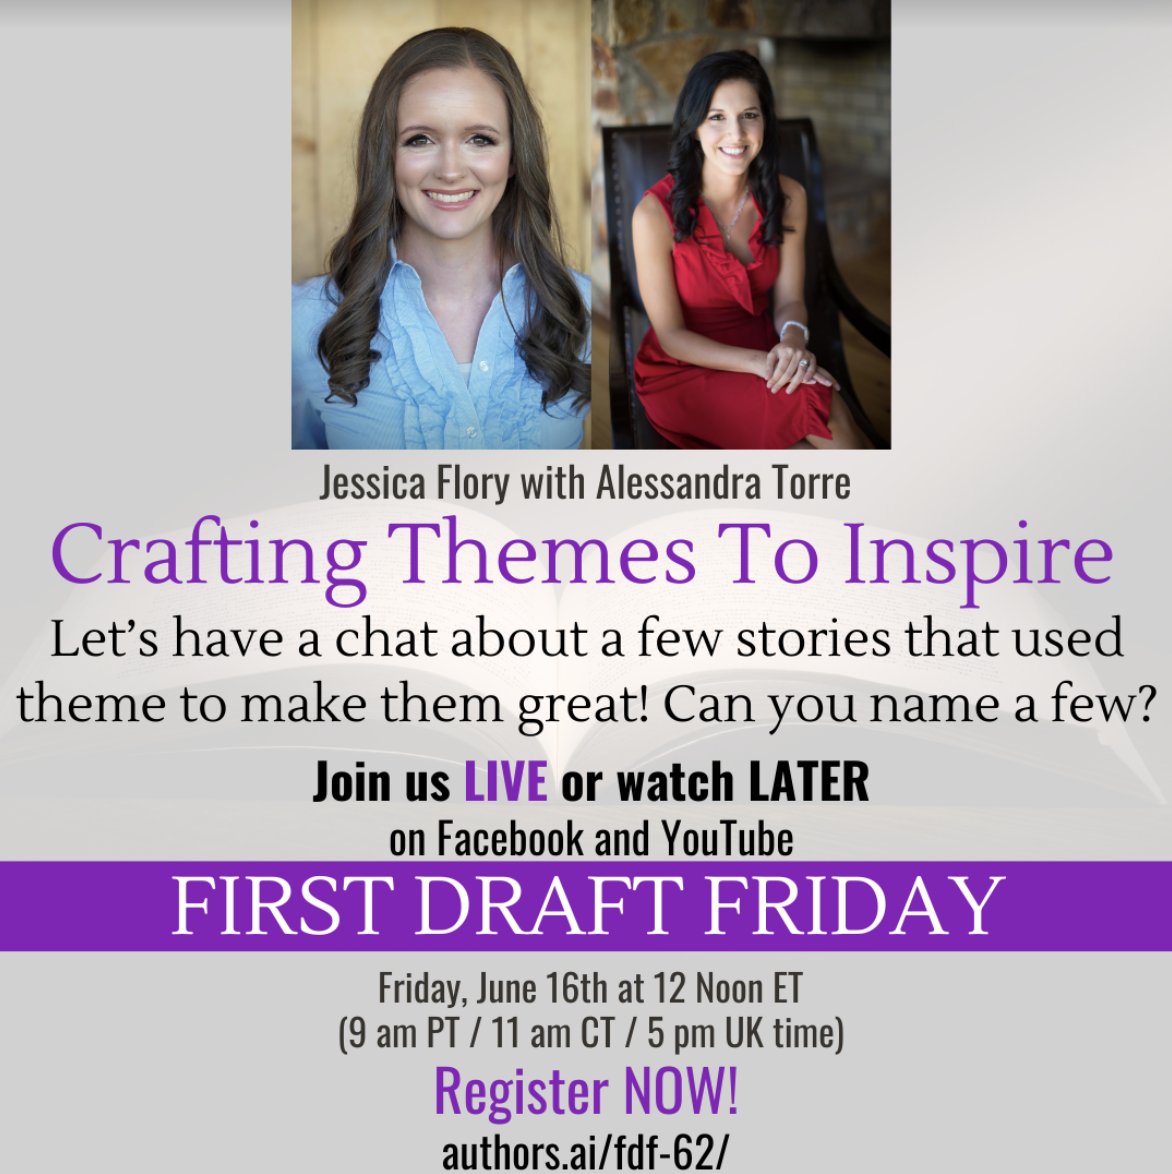 This Friday I'll be chatting live with Alessandra Torre of the podcast, Authors AI, about how to craft a theme for your novel! You can watch it live on her site or listen on her podcast at a later date. authors.ai/author/alessan…

#authortalk #writingtips #novelwriting #NovelTheme